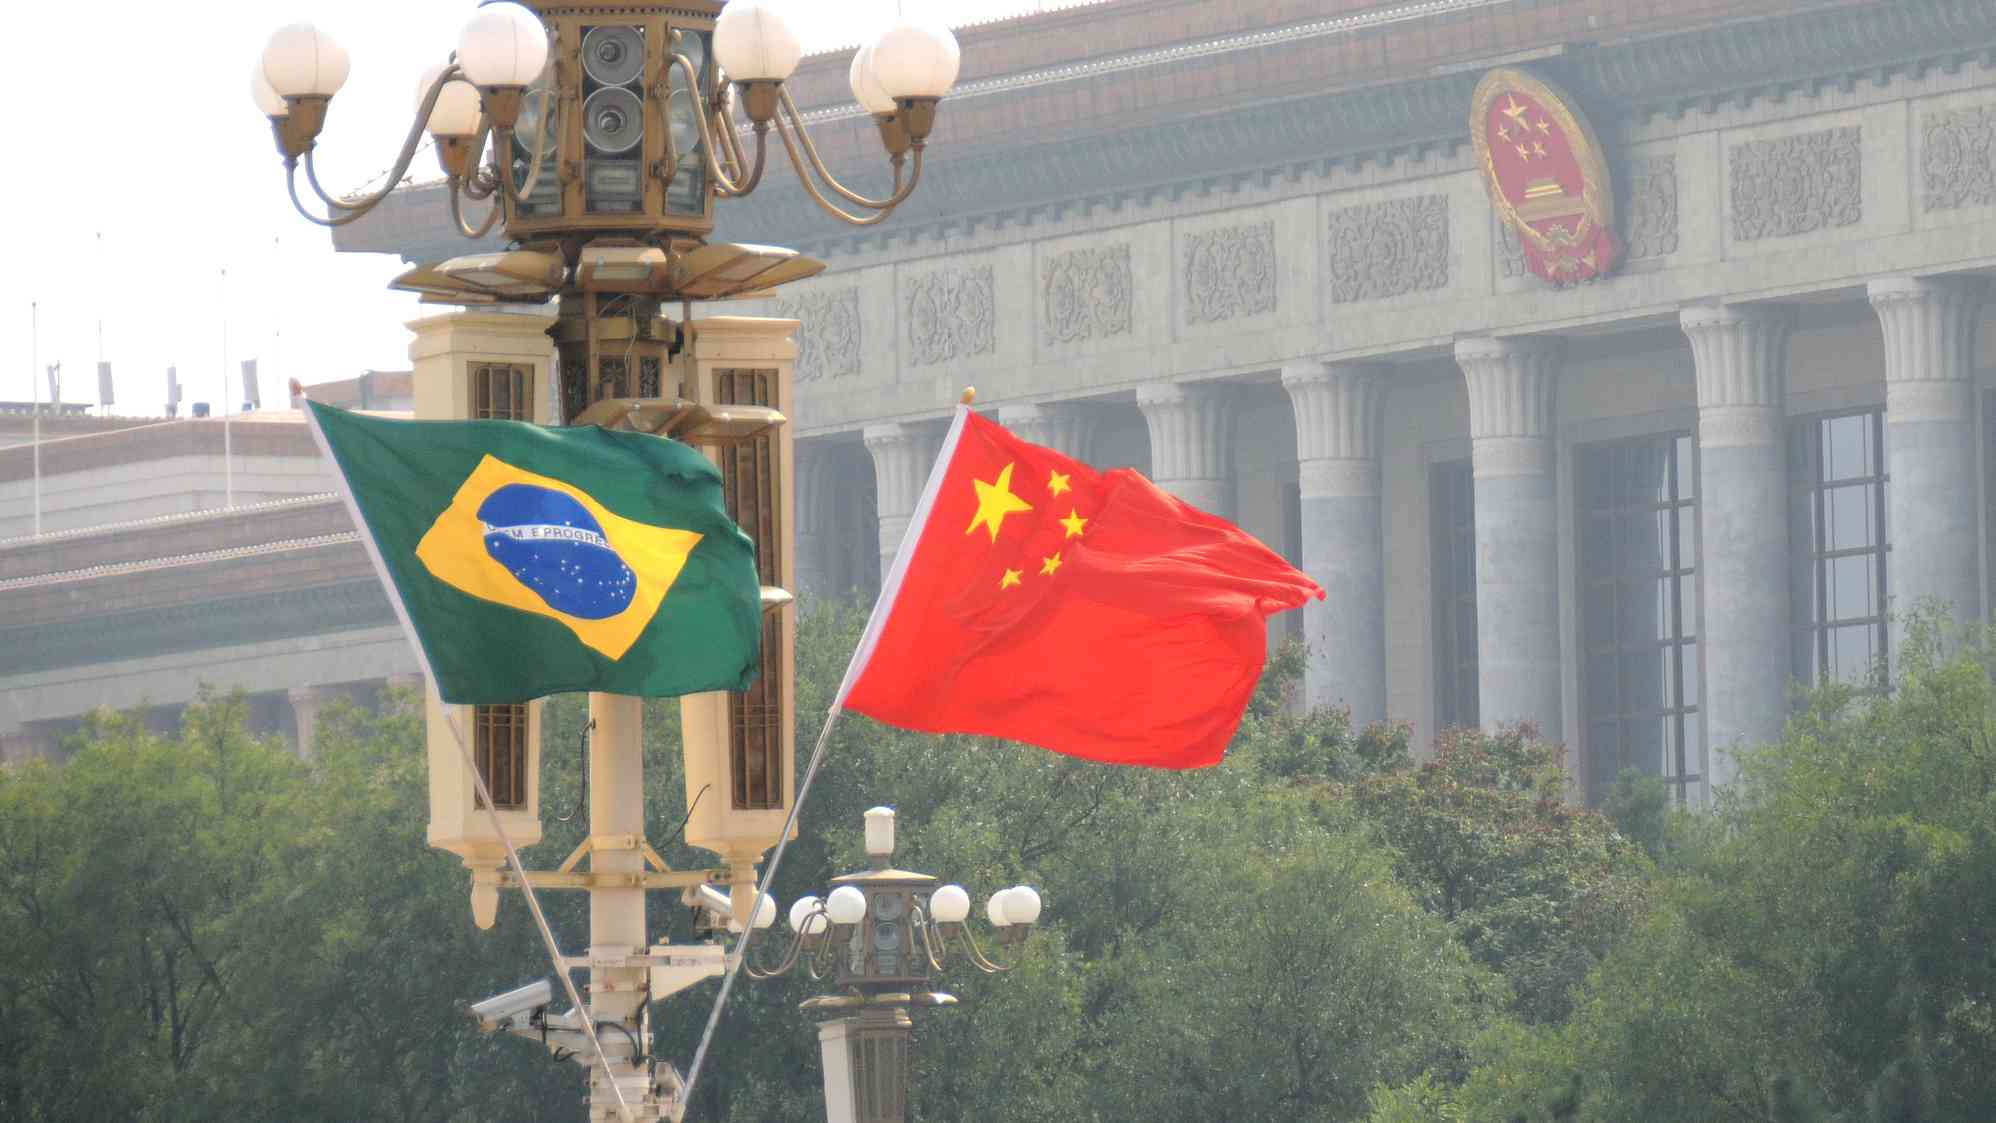 Established as Brazil's main trading partner, China accounted for US$33.6 billion of the US$50.9 billion trade balance surplus in 2020, according to data from the Foreign Trade Indicator (ICOMEX), released this Friday, January 15th by the Getúlio Vargas Foundation (FGV).